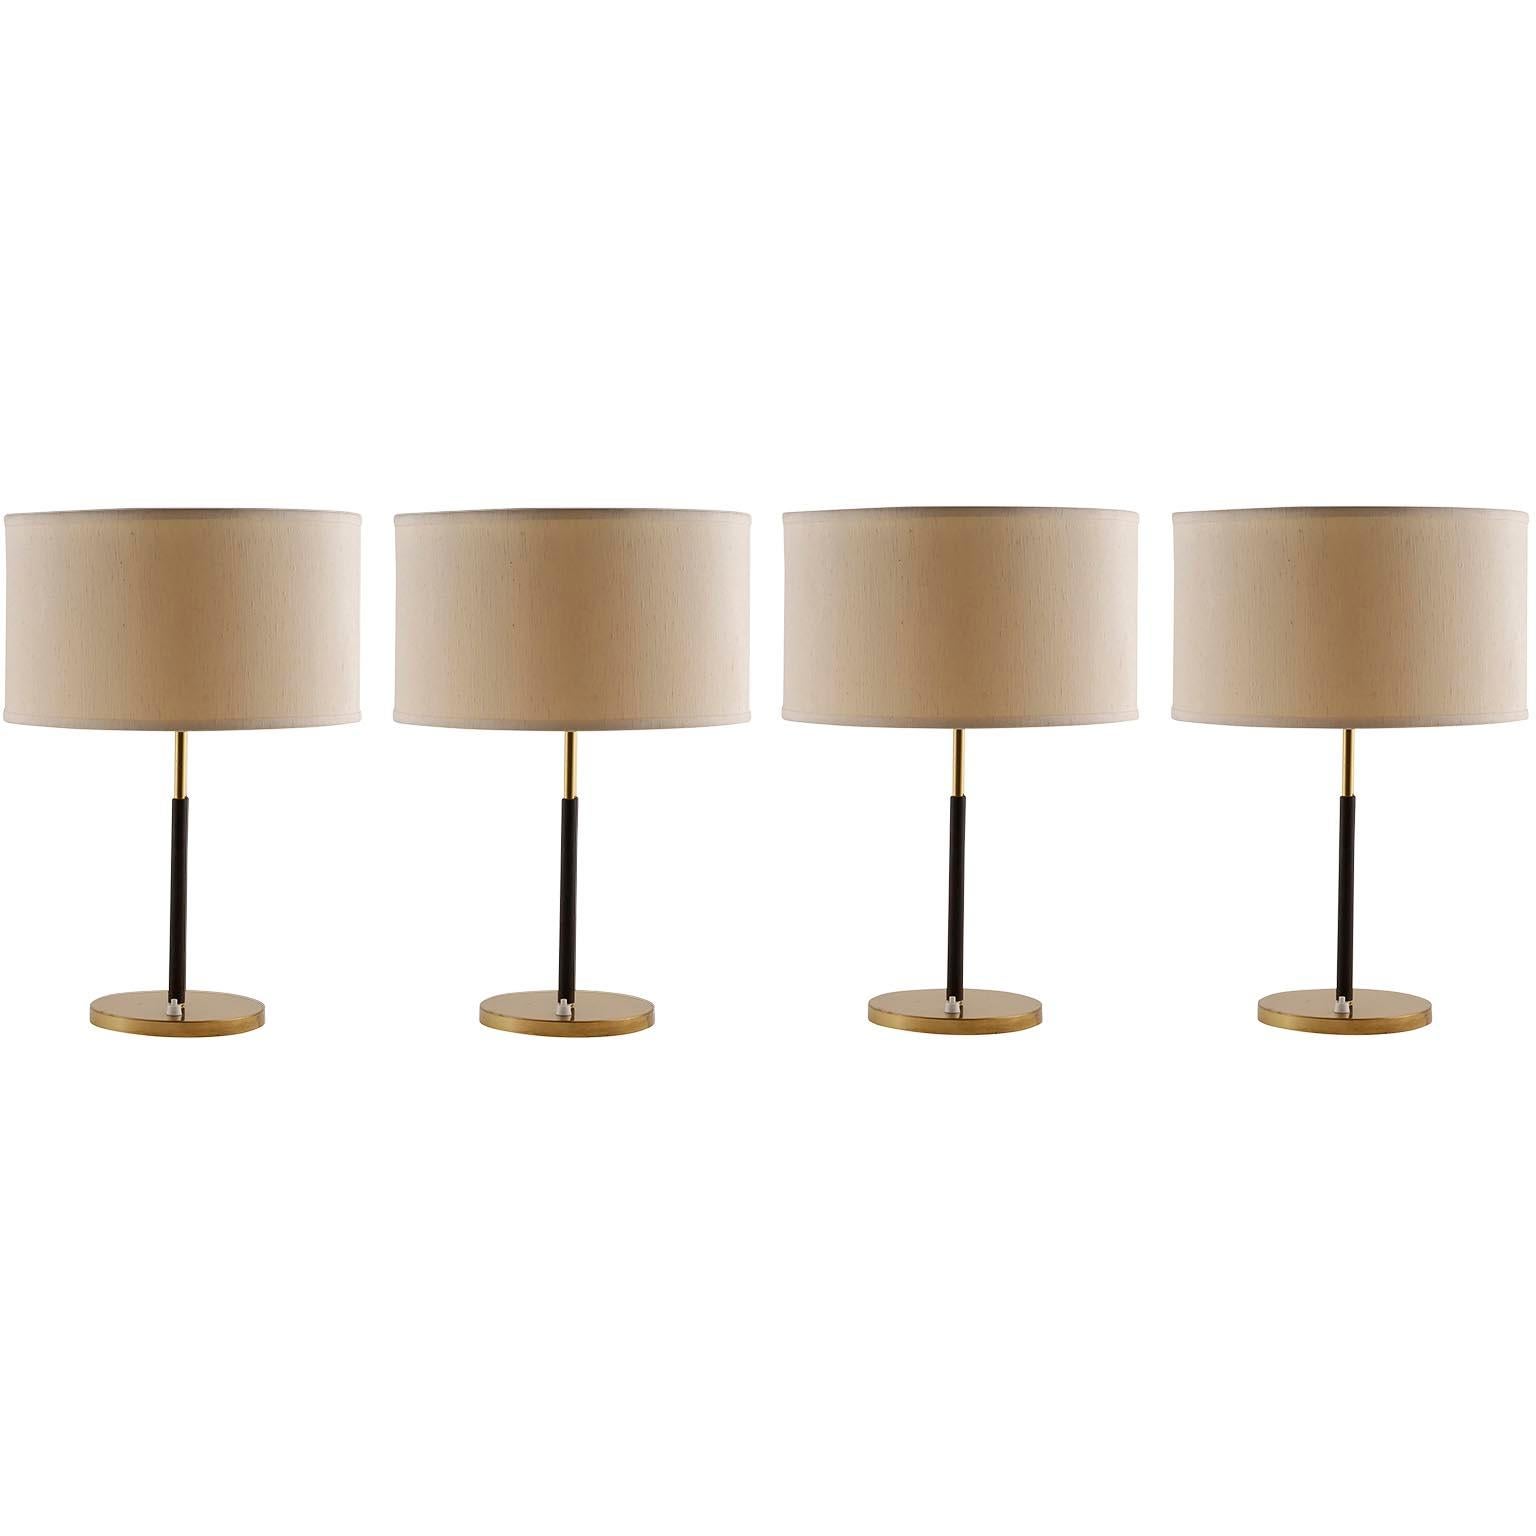 Two Pairs of Kalmar Table Lamps, Brass Leather, 1960s